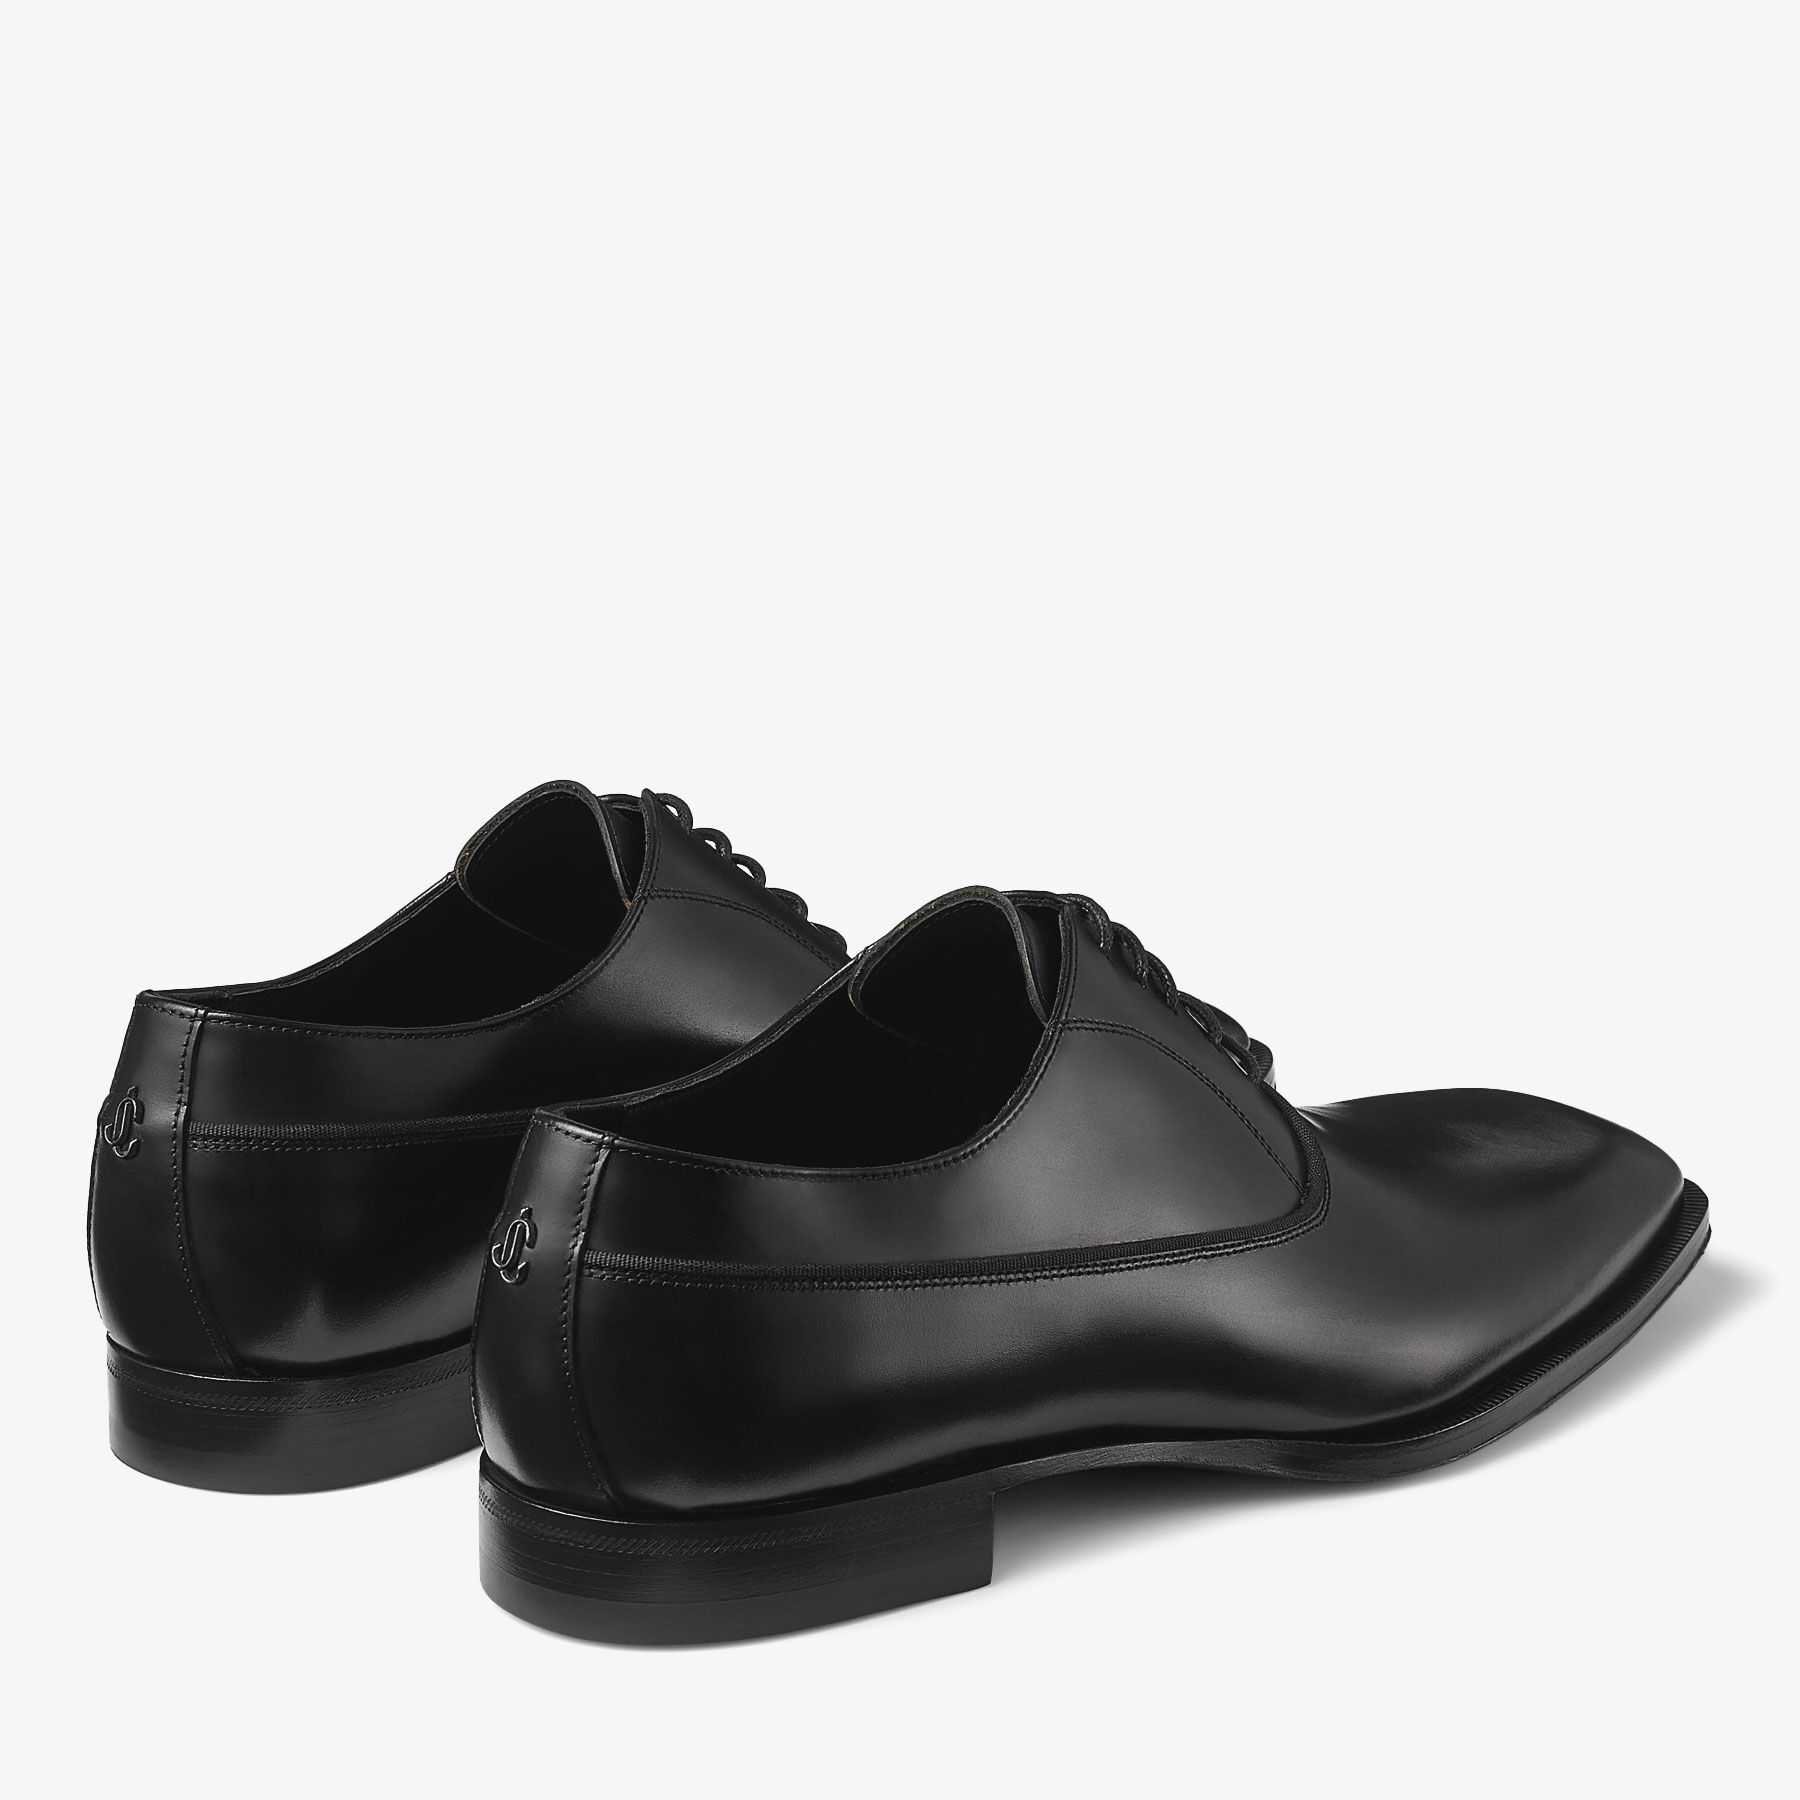 Foxley Oxford Shoe | Black Calf Leather Shoes | New Collection